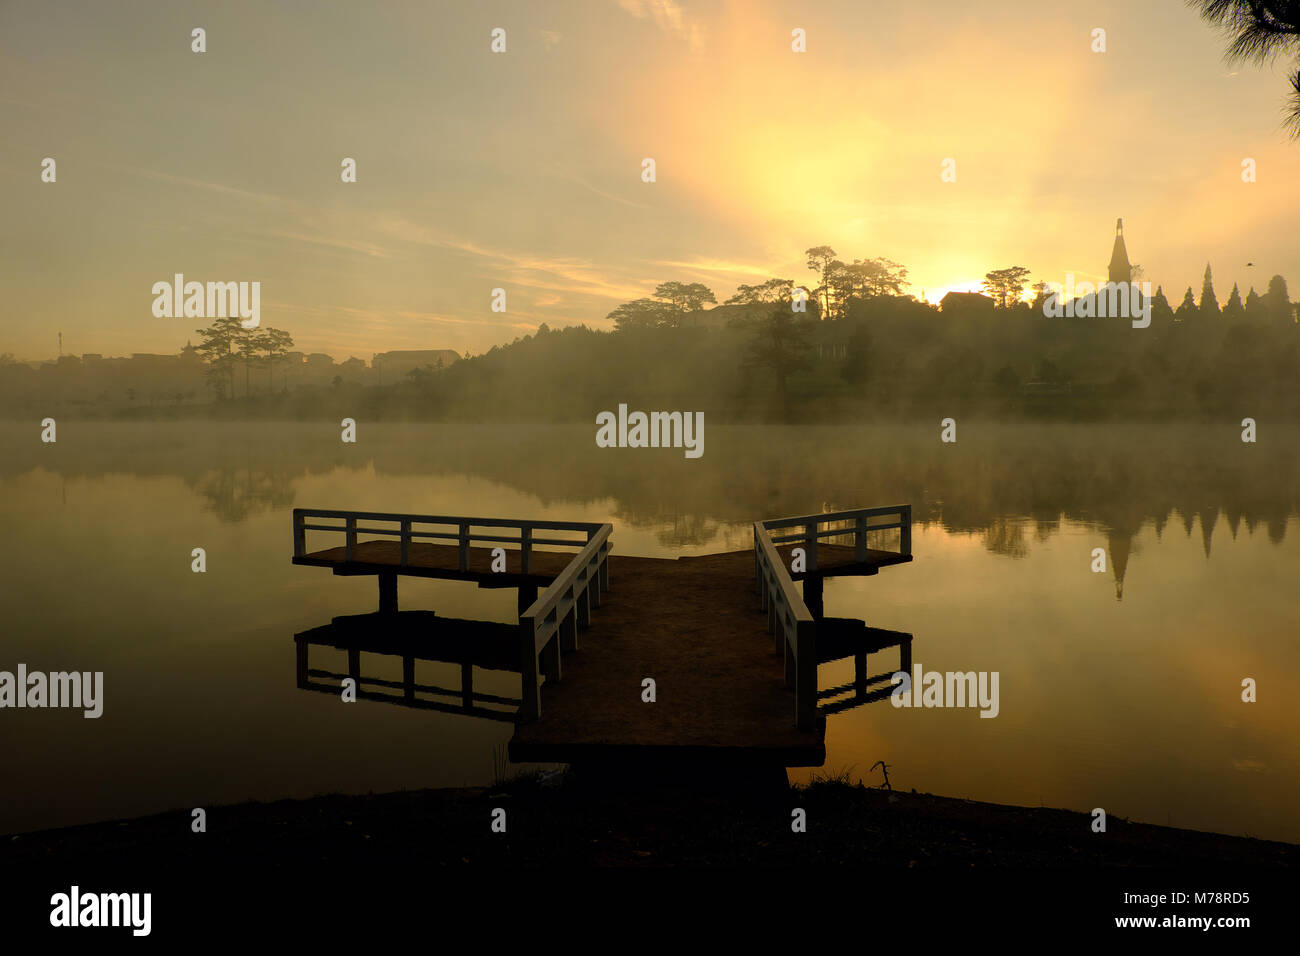 Destination for Vietnam travel at Da Lat city, mist evaporate from surface water of lake, silhouette of small bridge reflect on pond, nice at sunrise Stock Photo